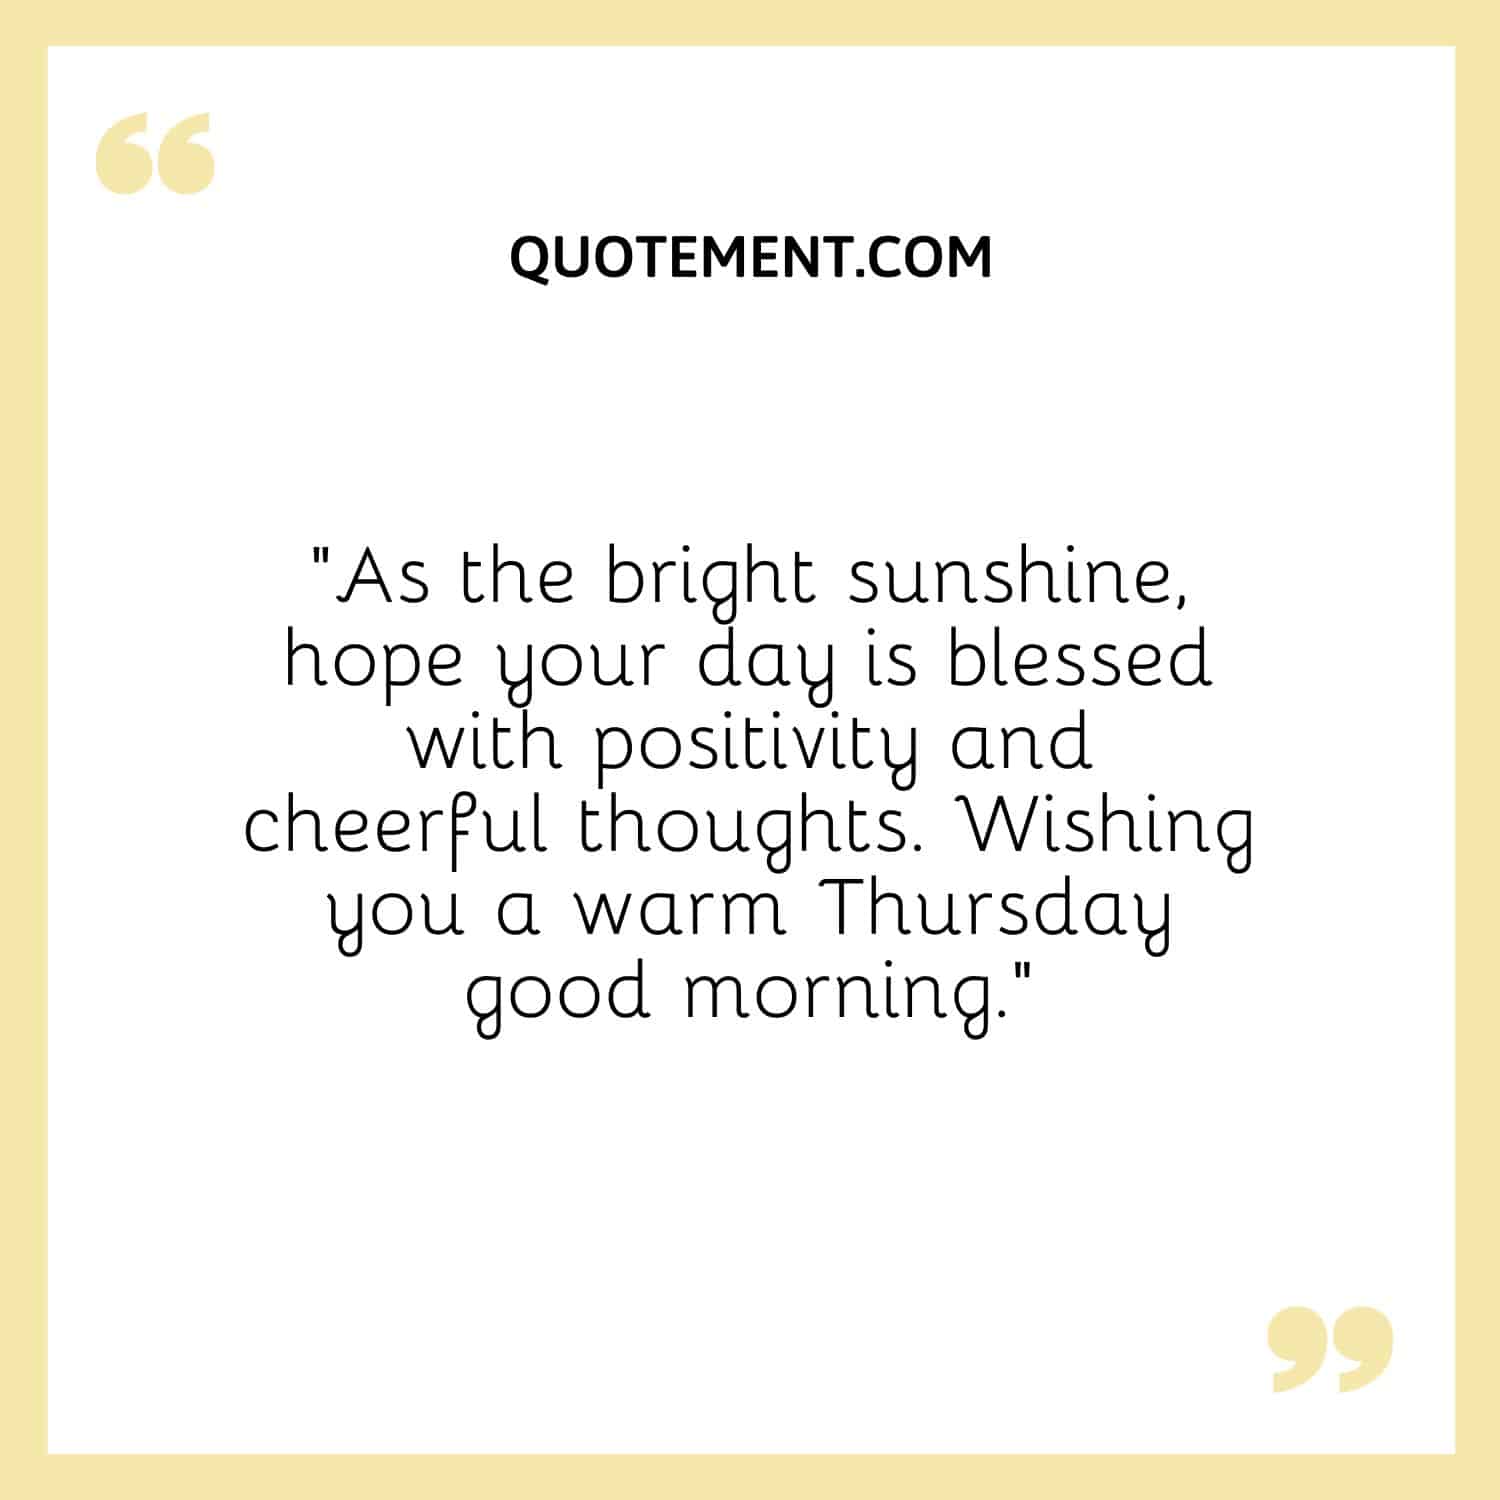 “As the bright sunshine, hope your day is blessed with positivity and cheerful thoughts. Wishing you a warm Thursday good morning.”